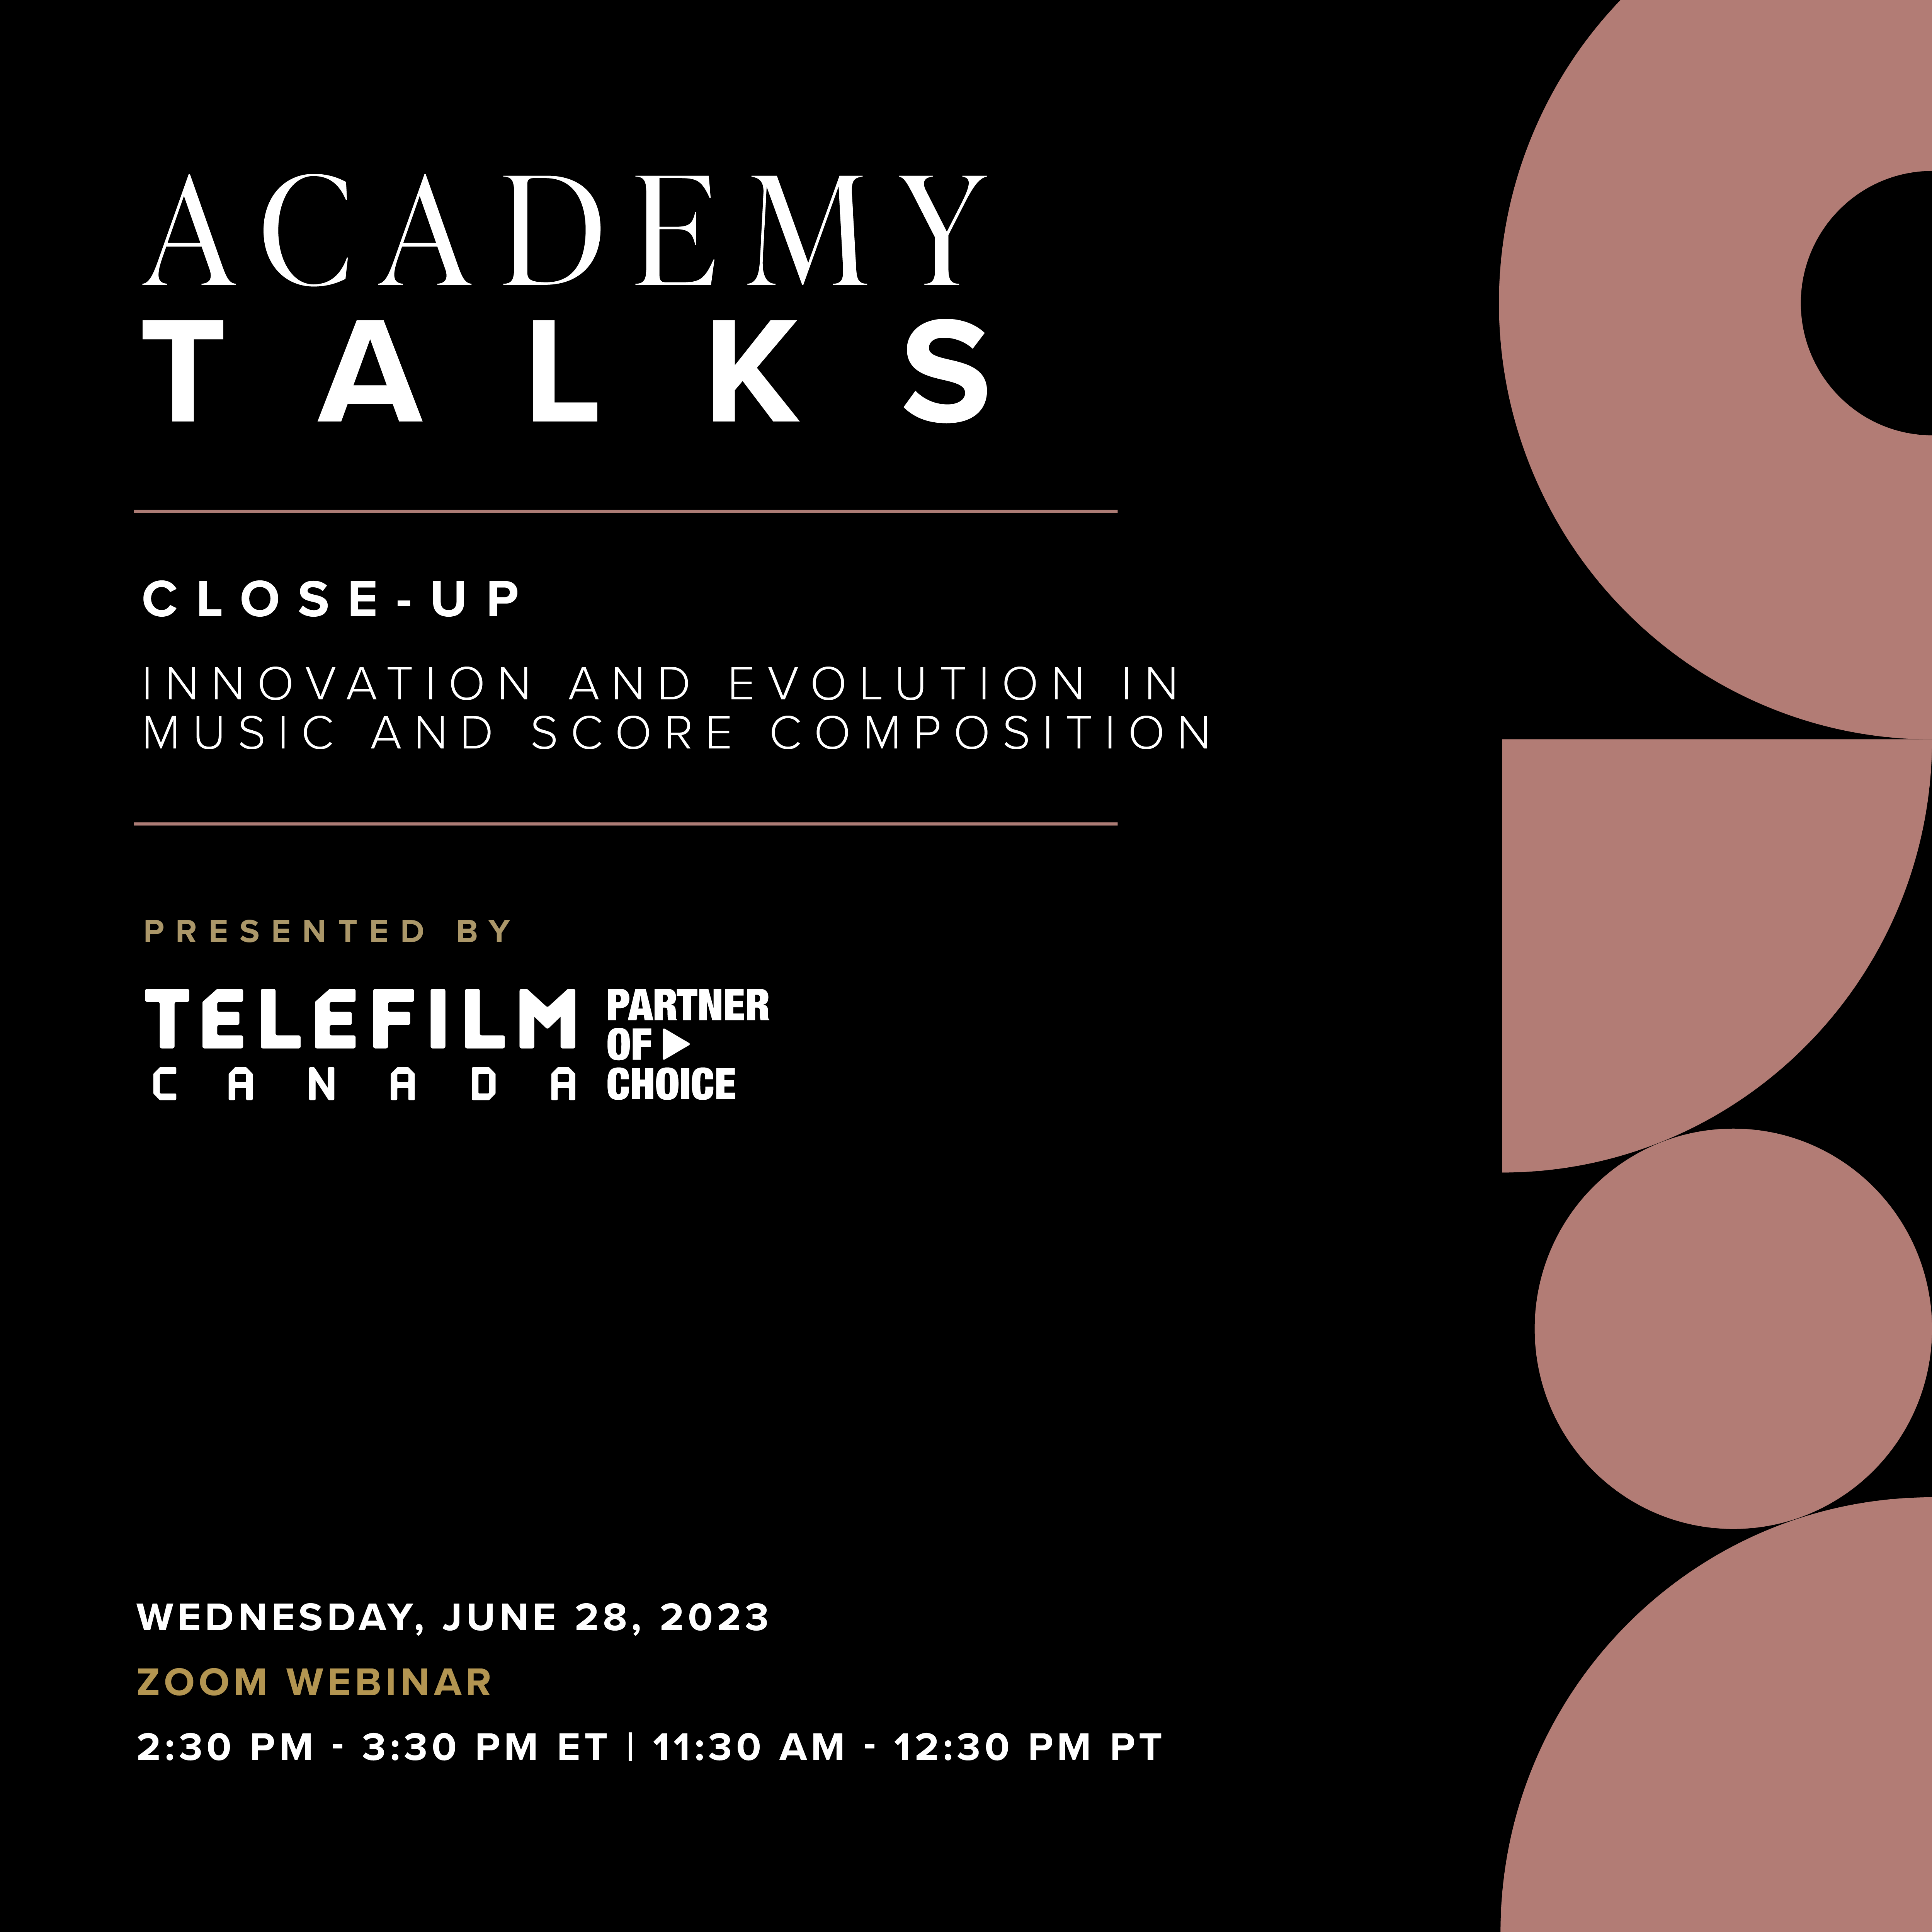 Academy Talks: Close-Up | Innovation and Evolution in Music and Score Composition